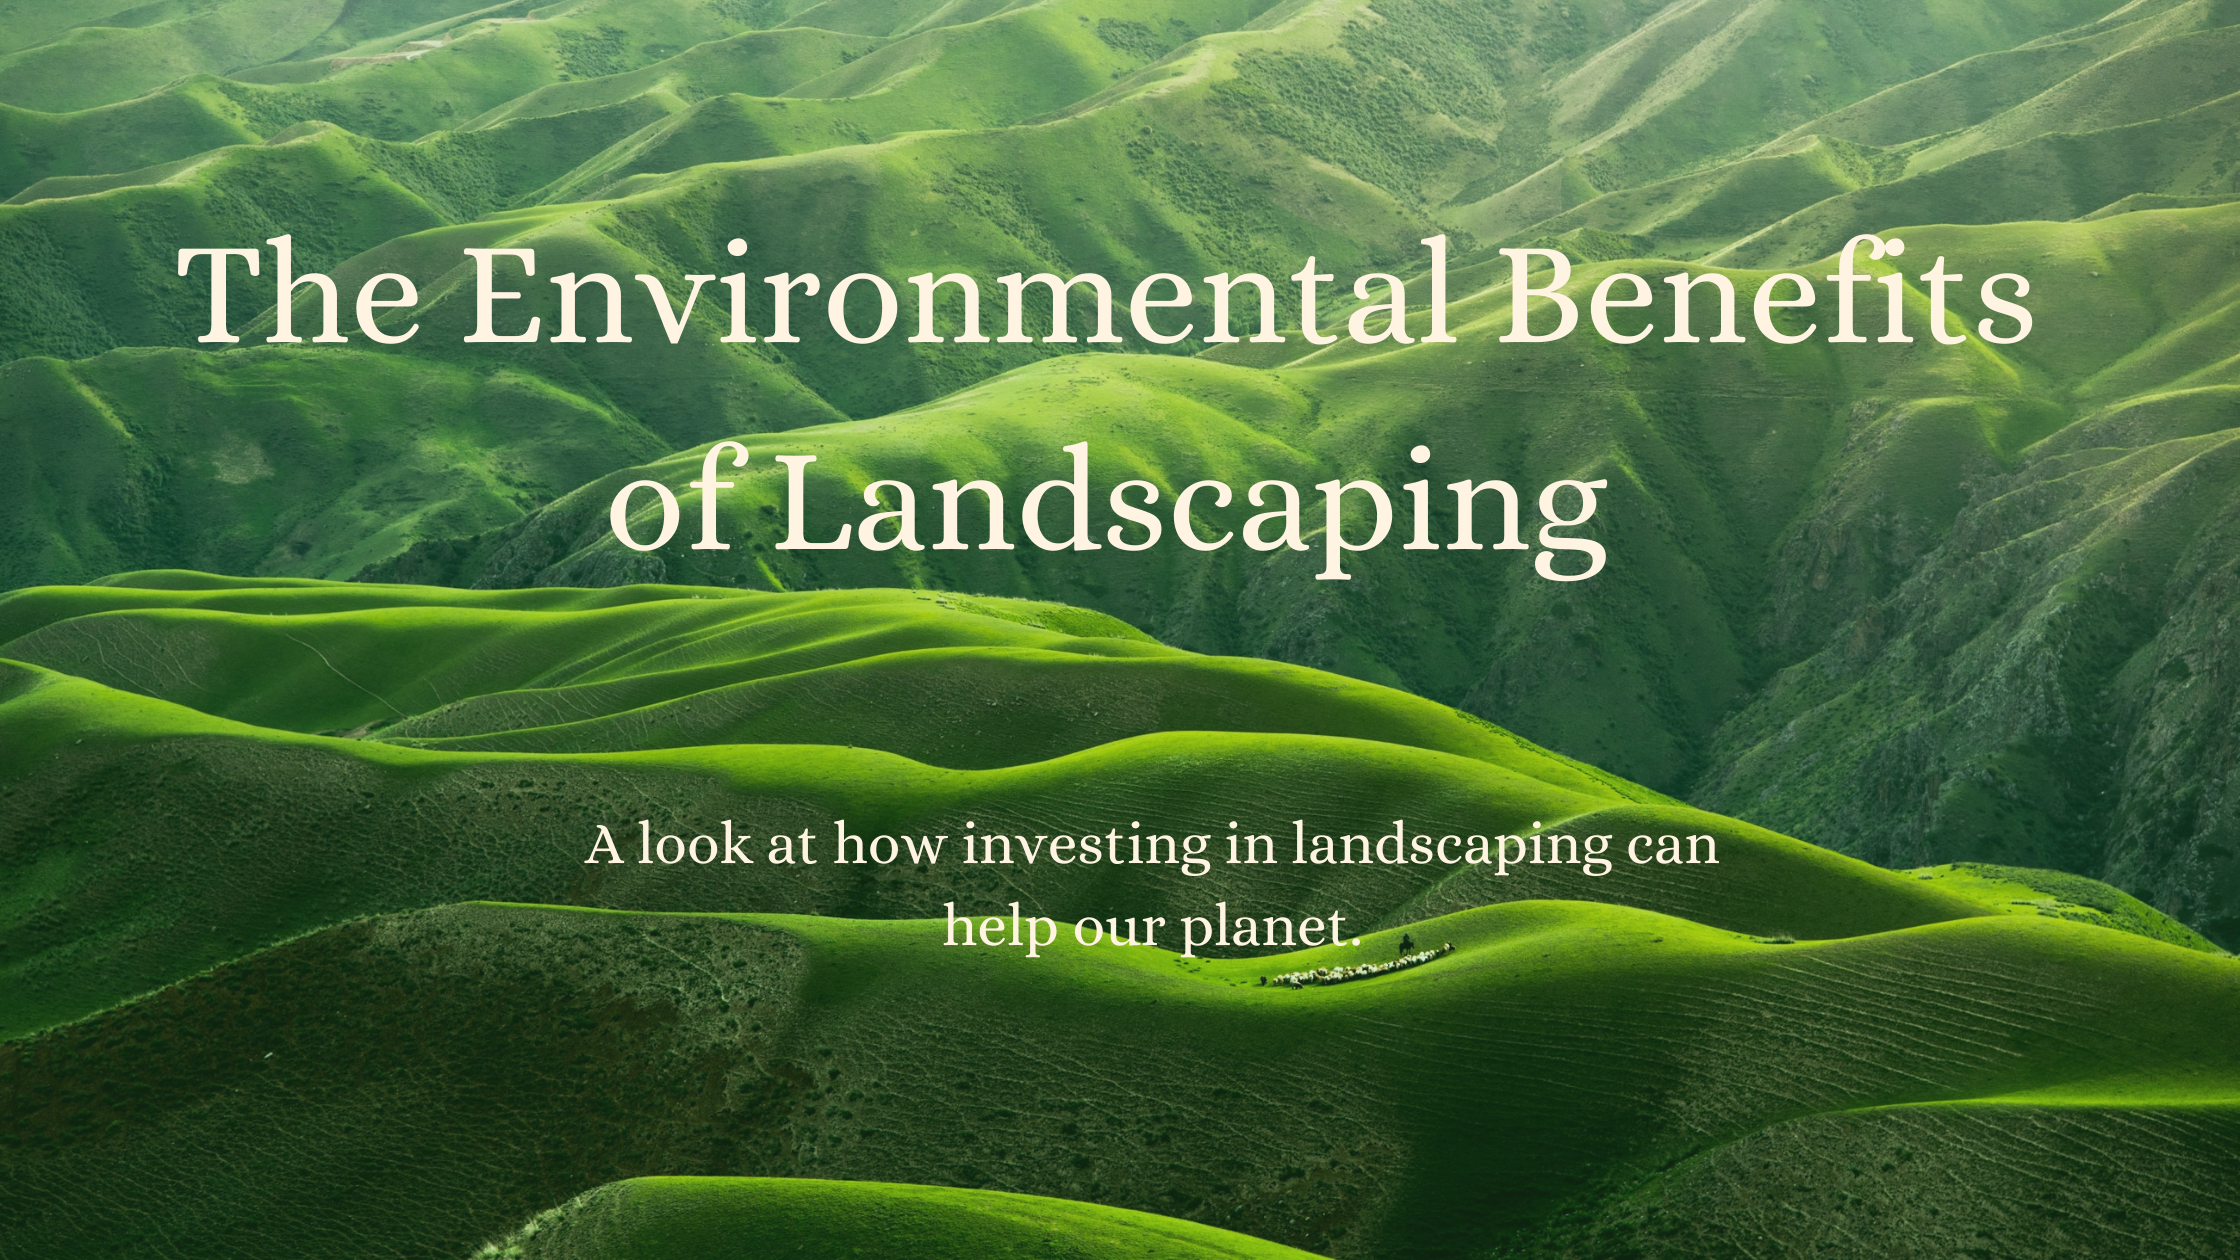 An image of green hills. With the text: The Environmental Benefits of Landscaping. A look at how investing in landscaping can help our planet.